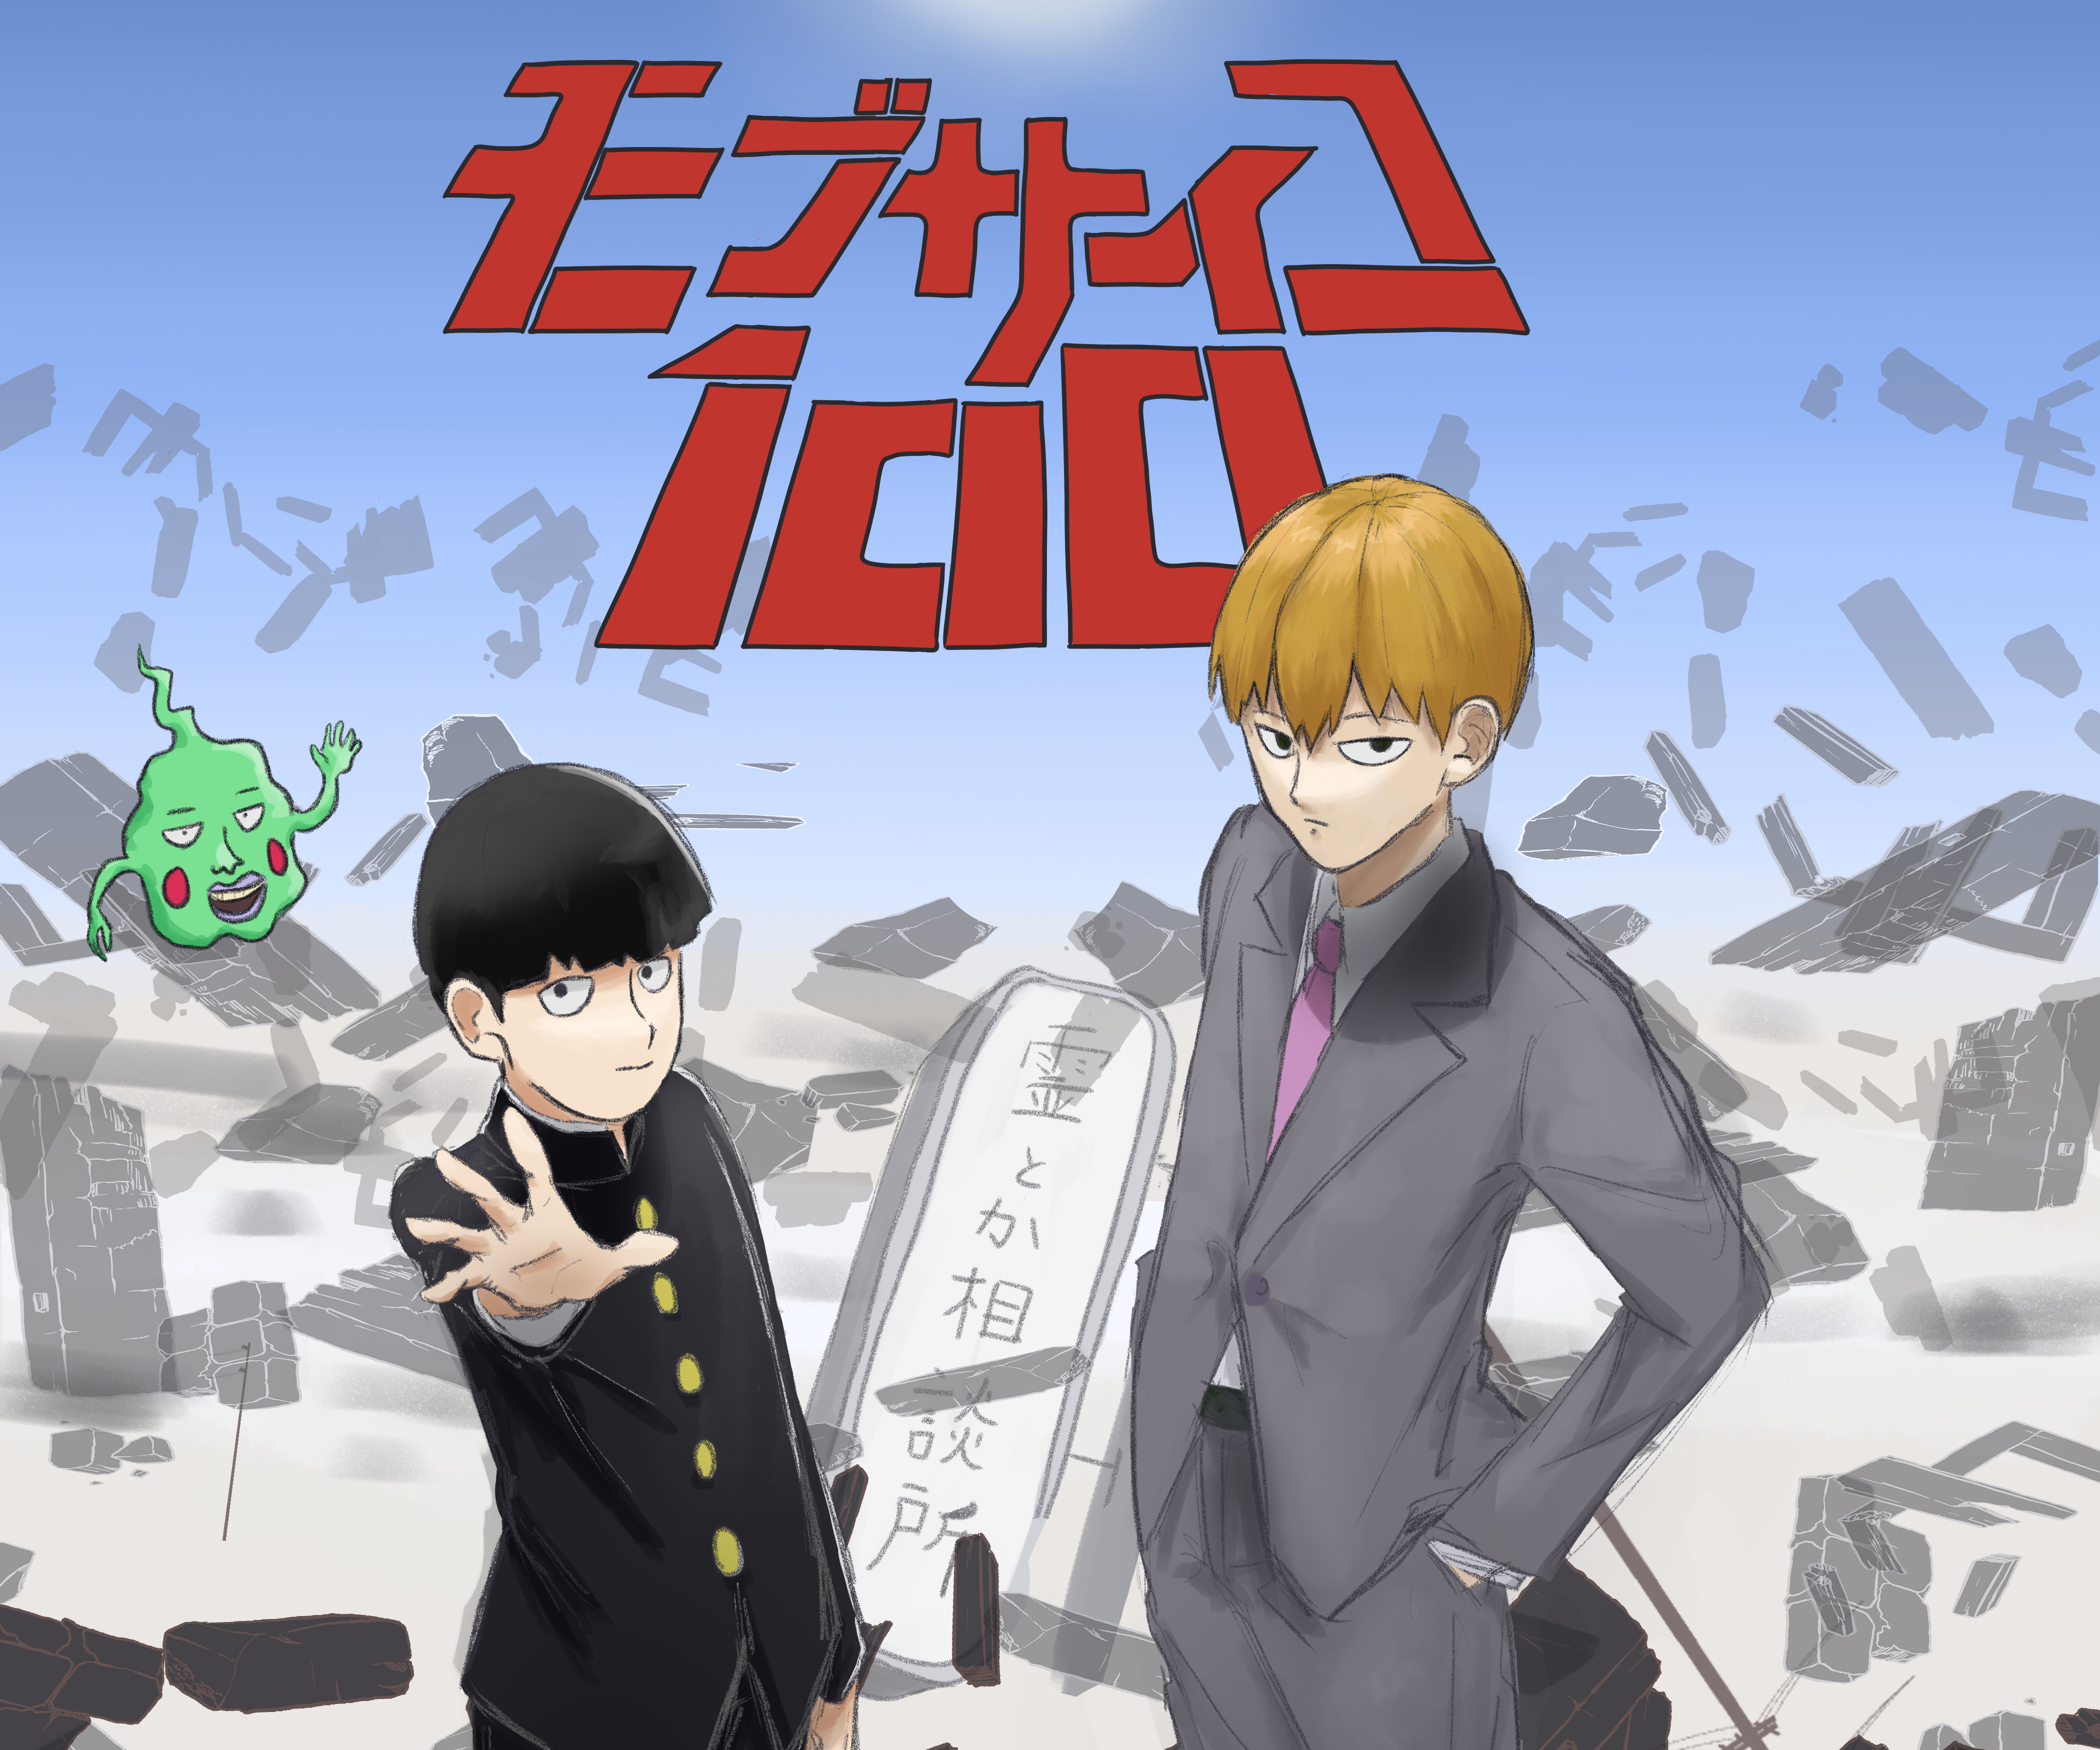 Crunchyroll - HAPPY HALLOWEEN FROM MOB AND TERU 🎃 Anime: Mob Psycho 100 |  Facebook